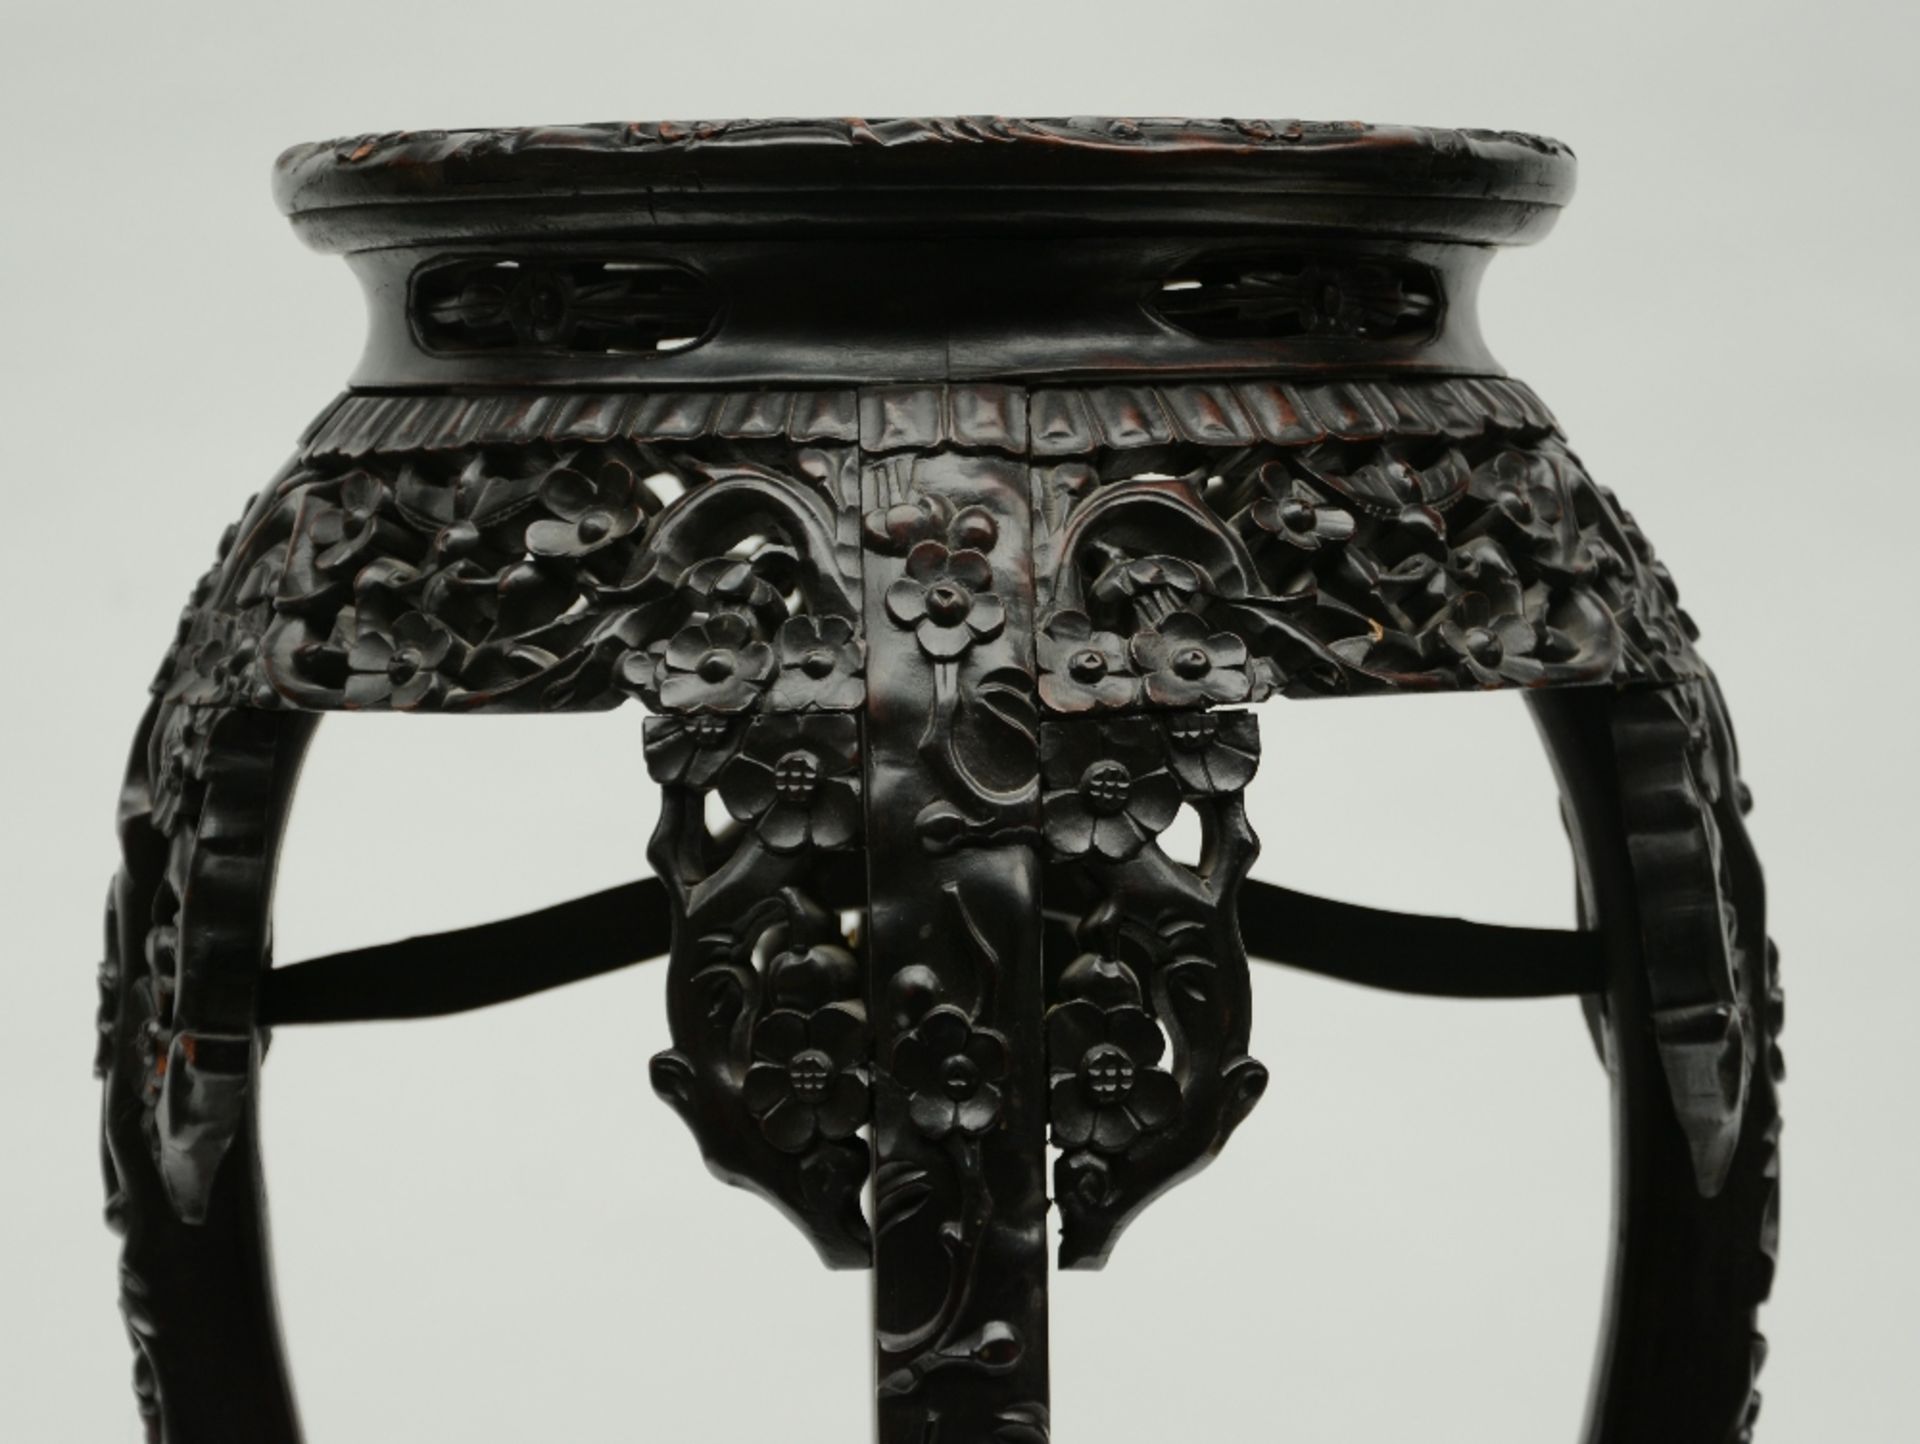 A Chinese wooden carved base with marble top, ca 1900, H 78,5 - W 152,5 cm - Image 8 of 8